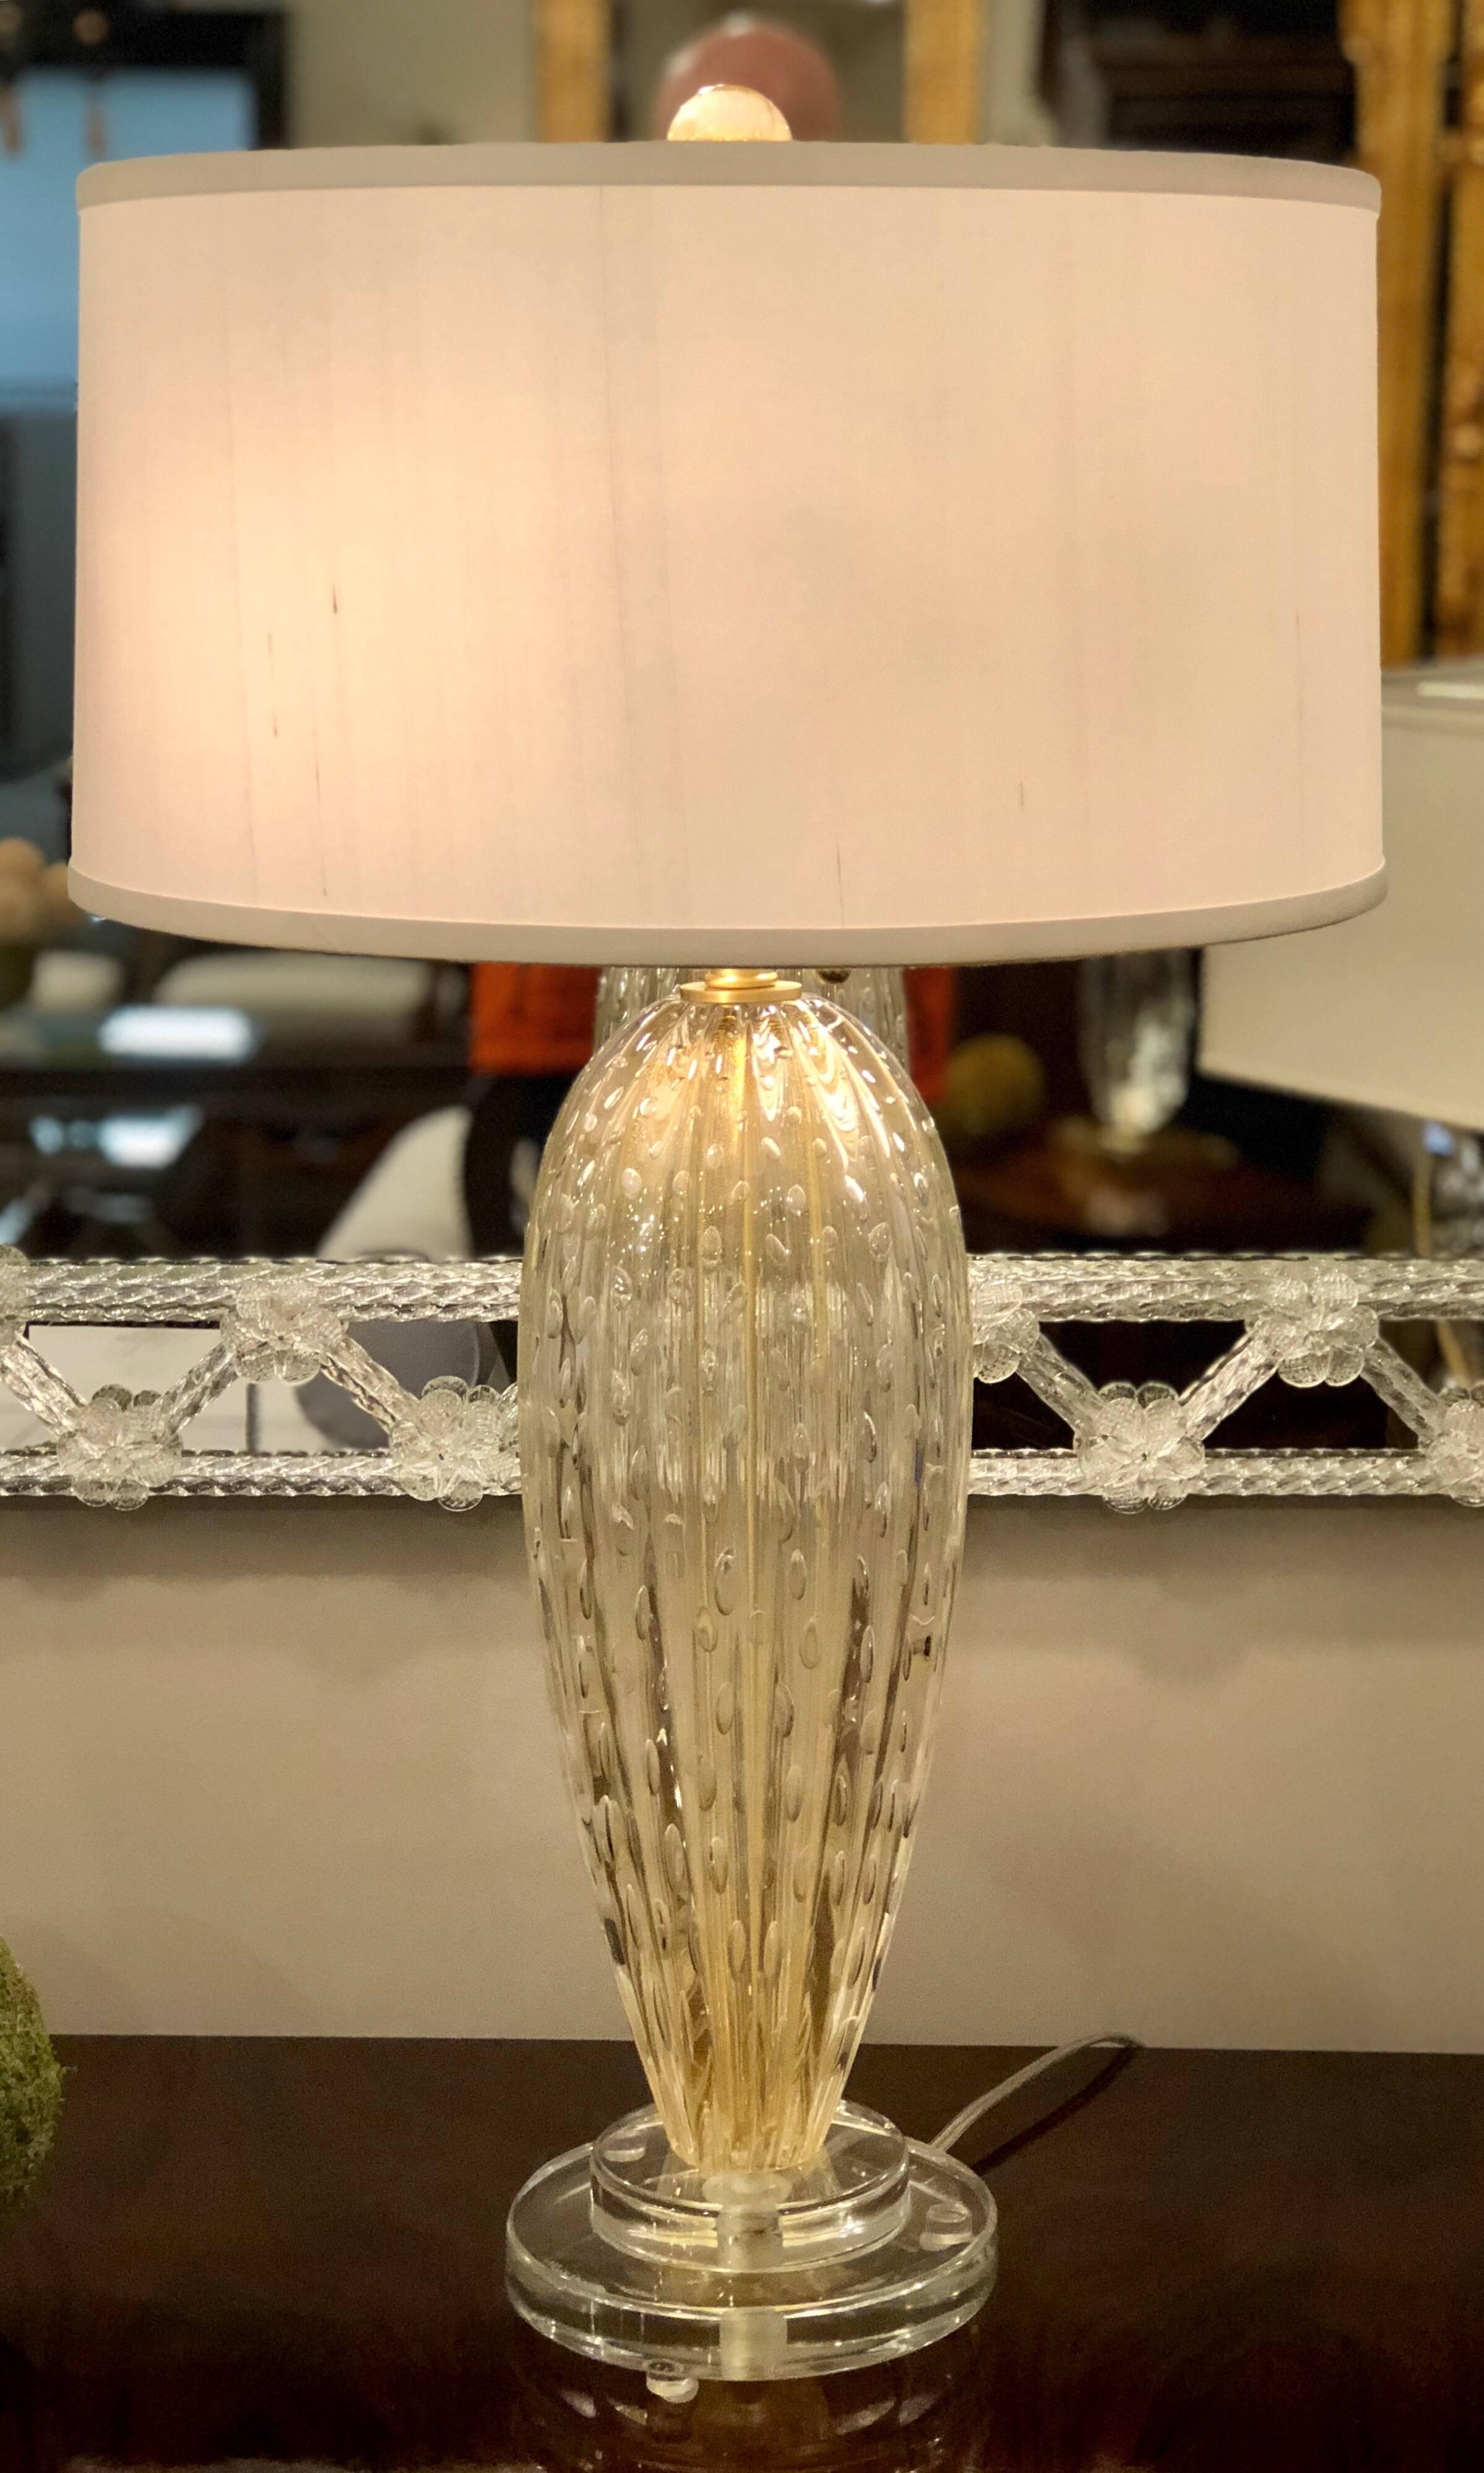 Elegant pair of Italian Mid-Century Modern style clear and gold Murano / Venetian glass table lamps.

The pieces are formed using the Murano bubble glass technique of 